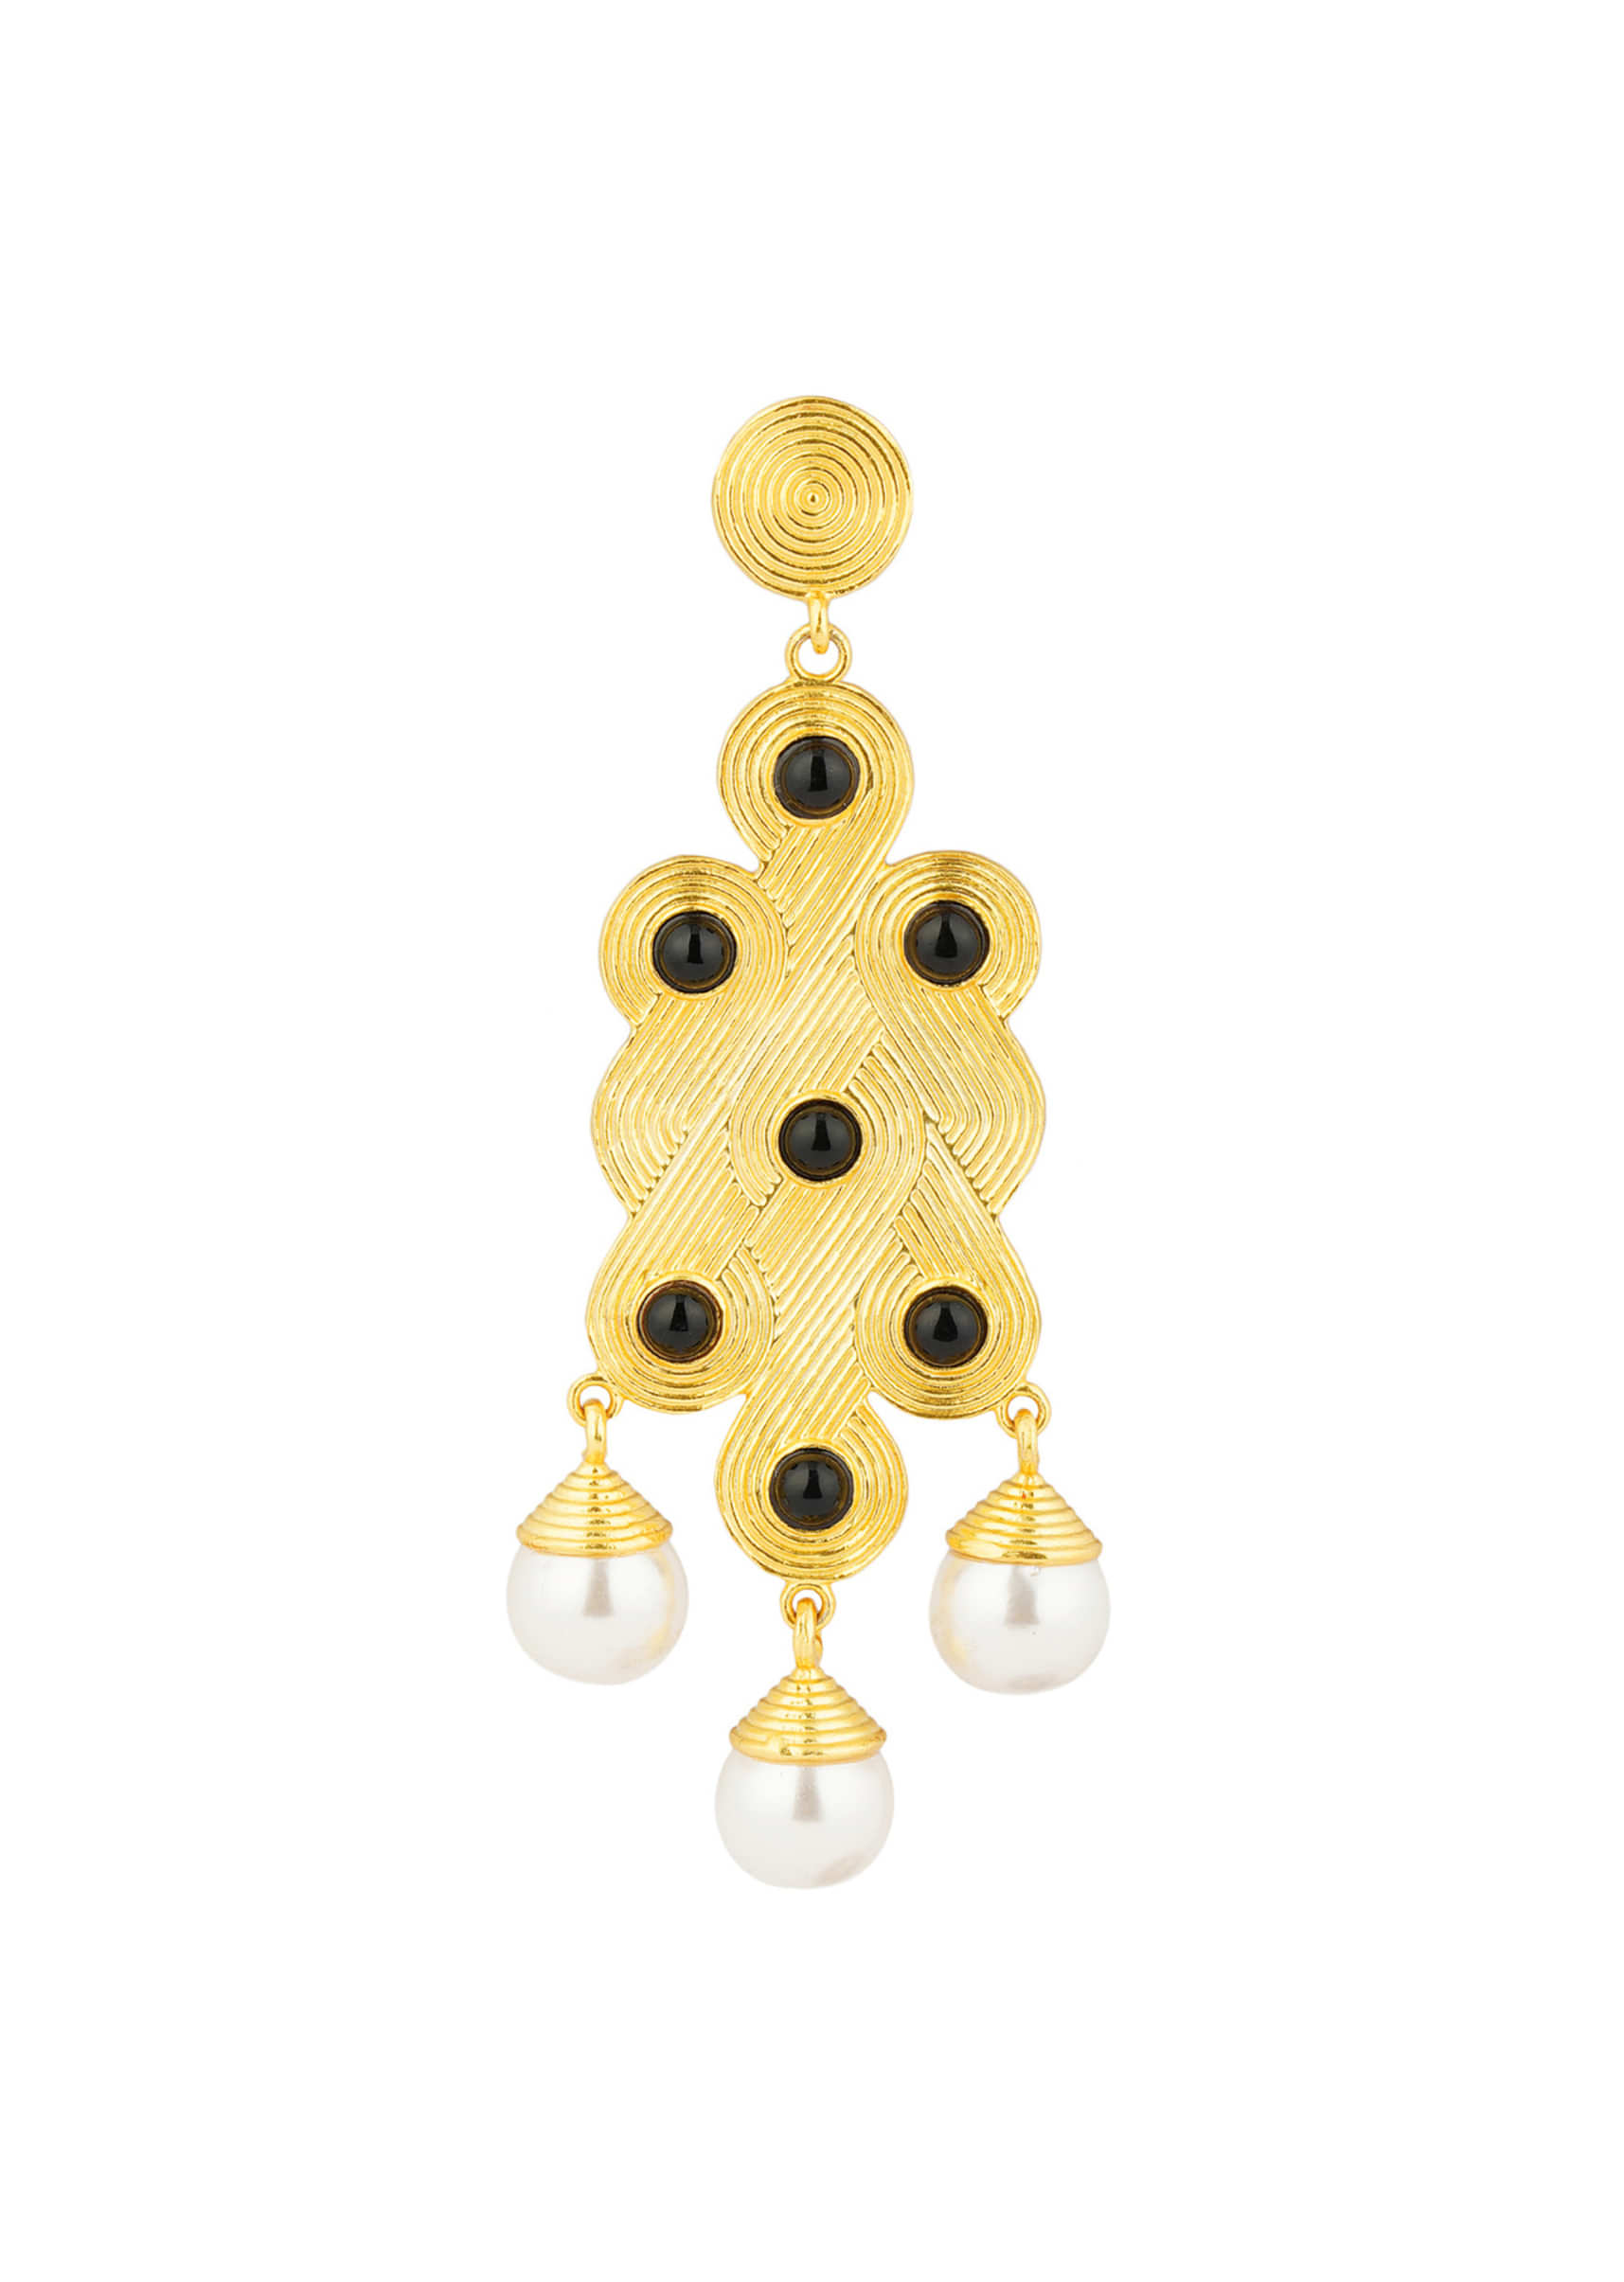 Gold Plated Designer Earrings With Onyx Stones And Dangling Freshwater Pearl Drops